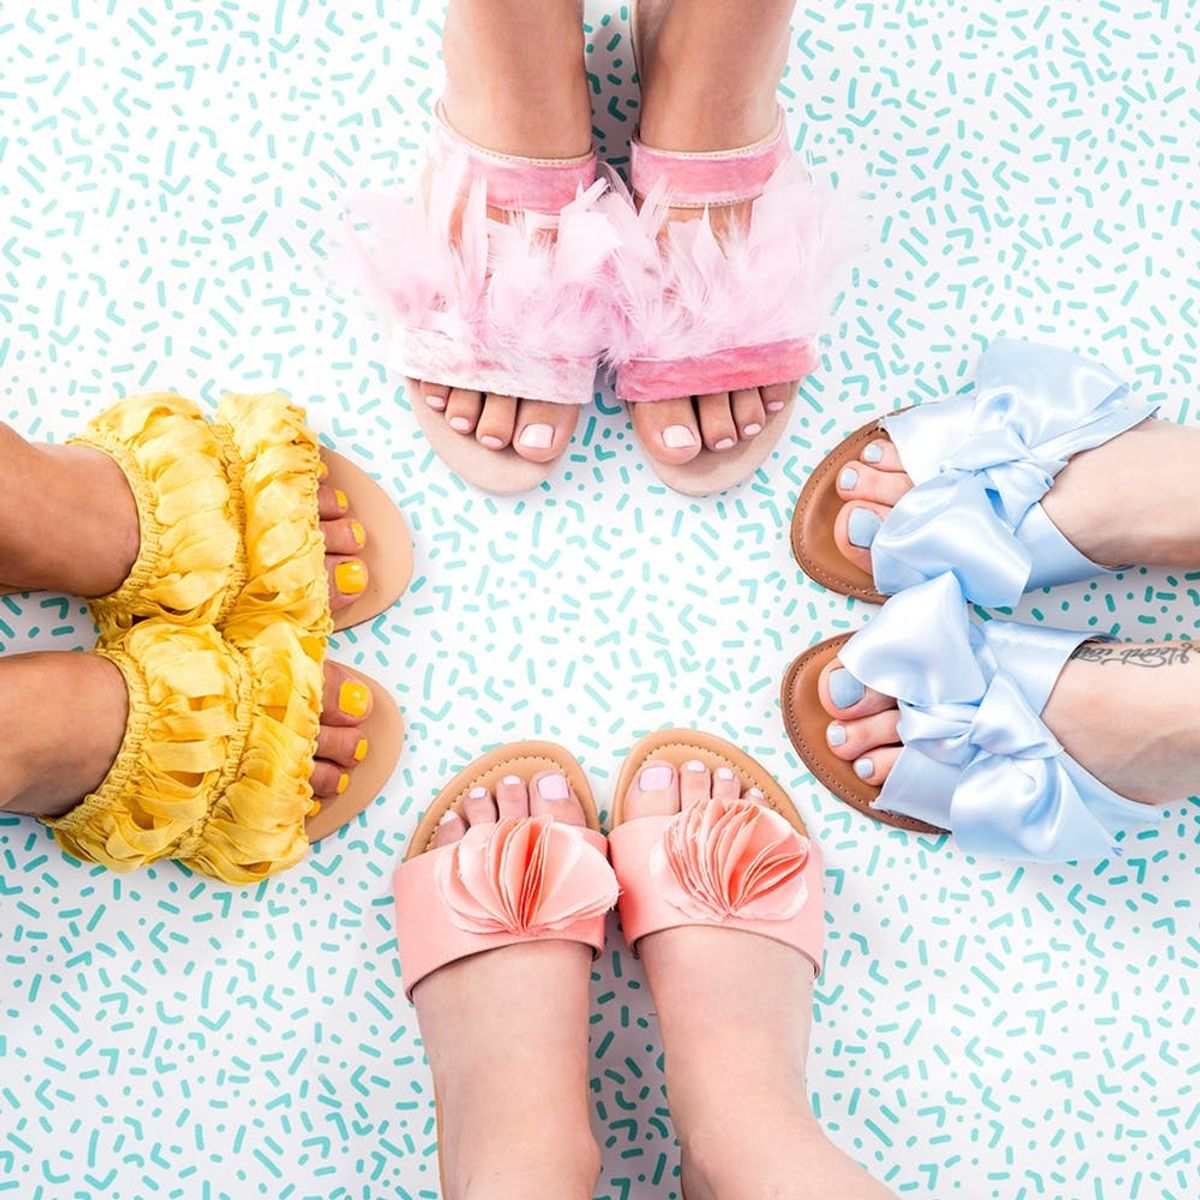 Step Up Your #Shoefie Game With These 4 Sandal DIY Hacks